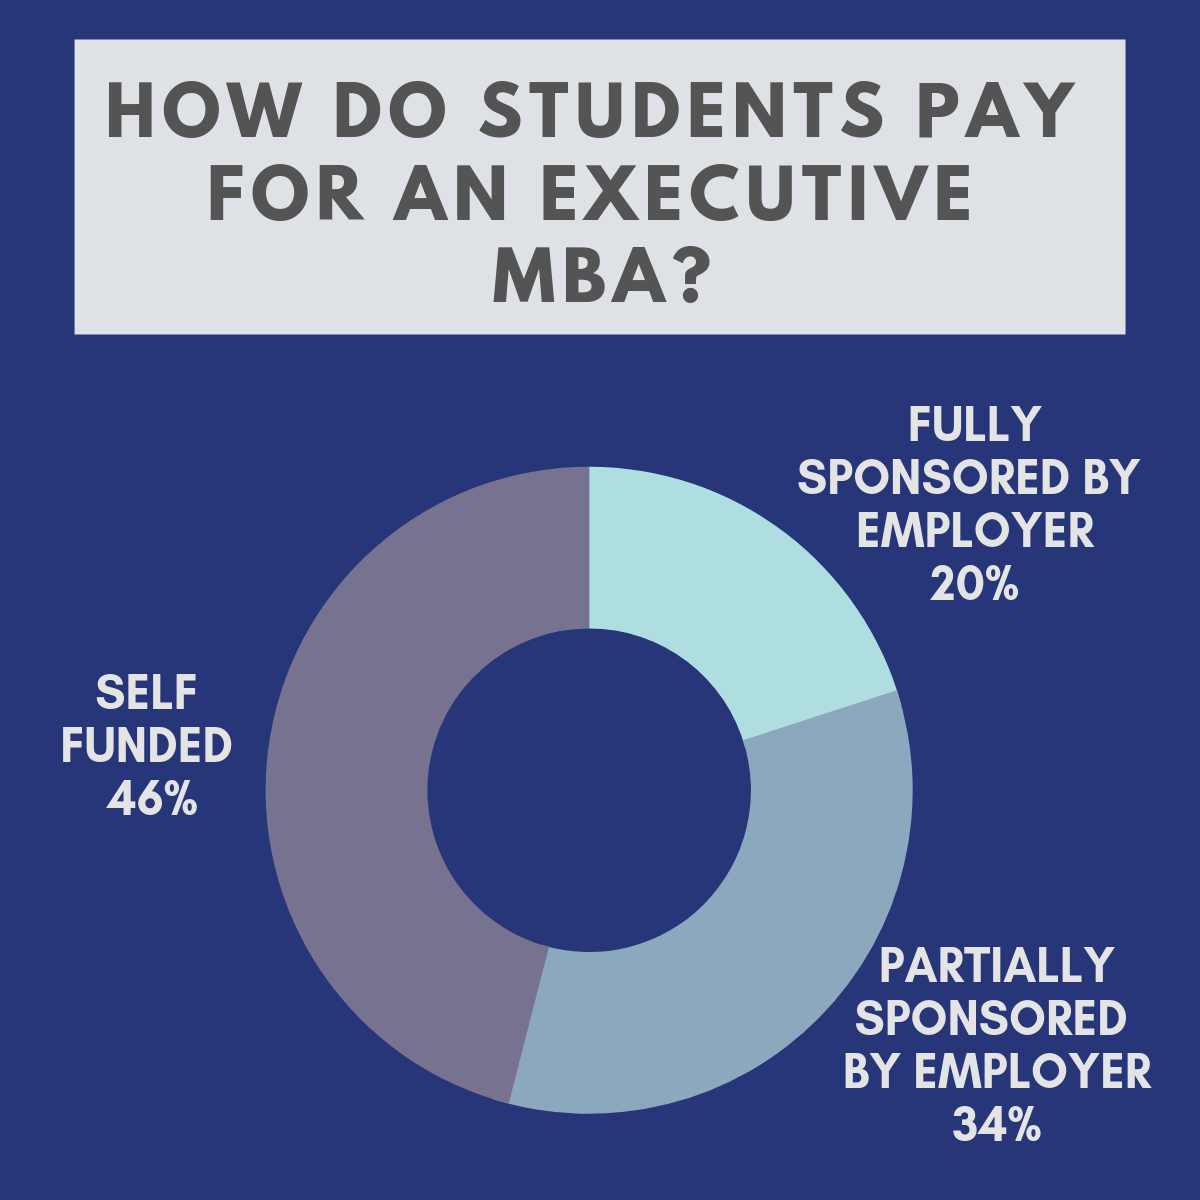 How do students pay for an executive MBA